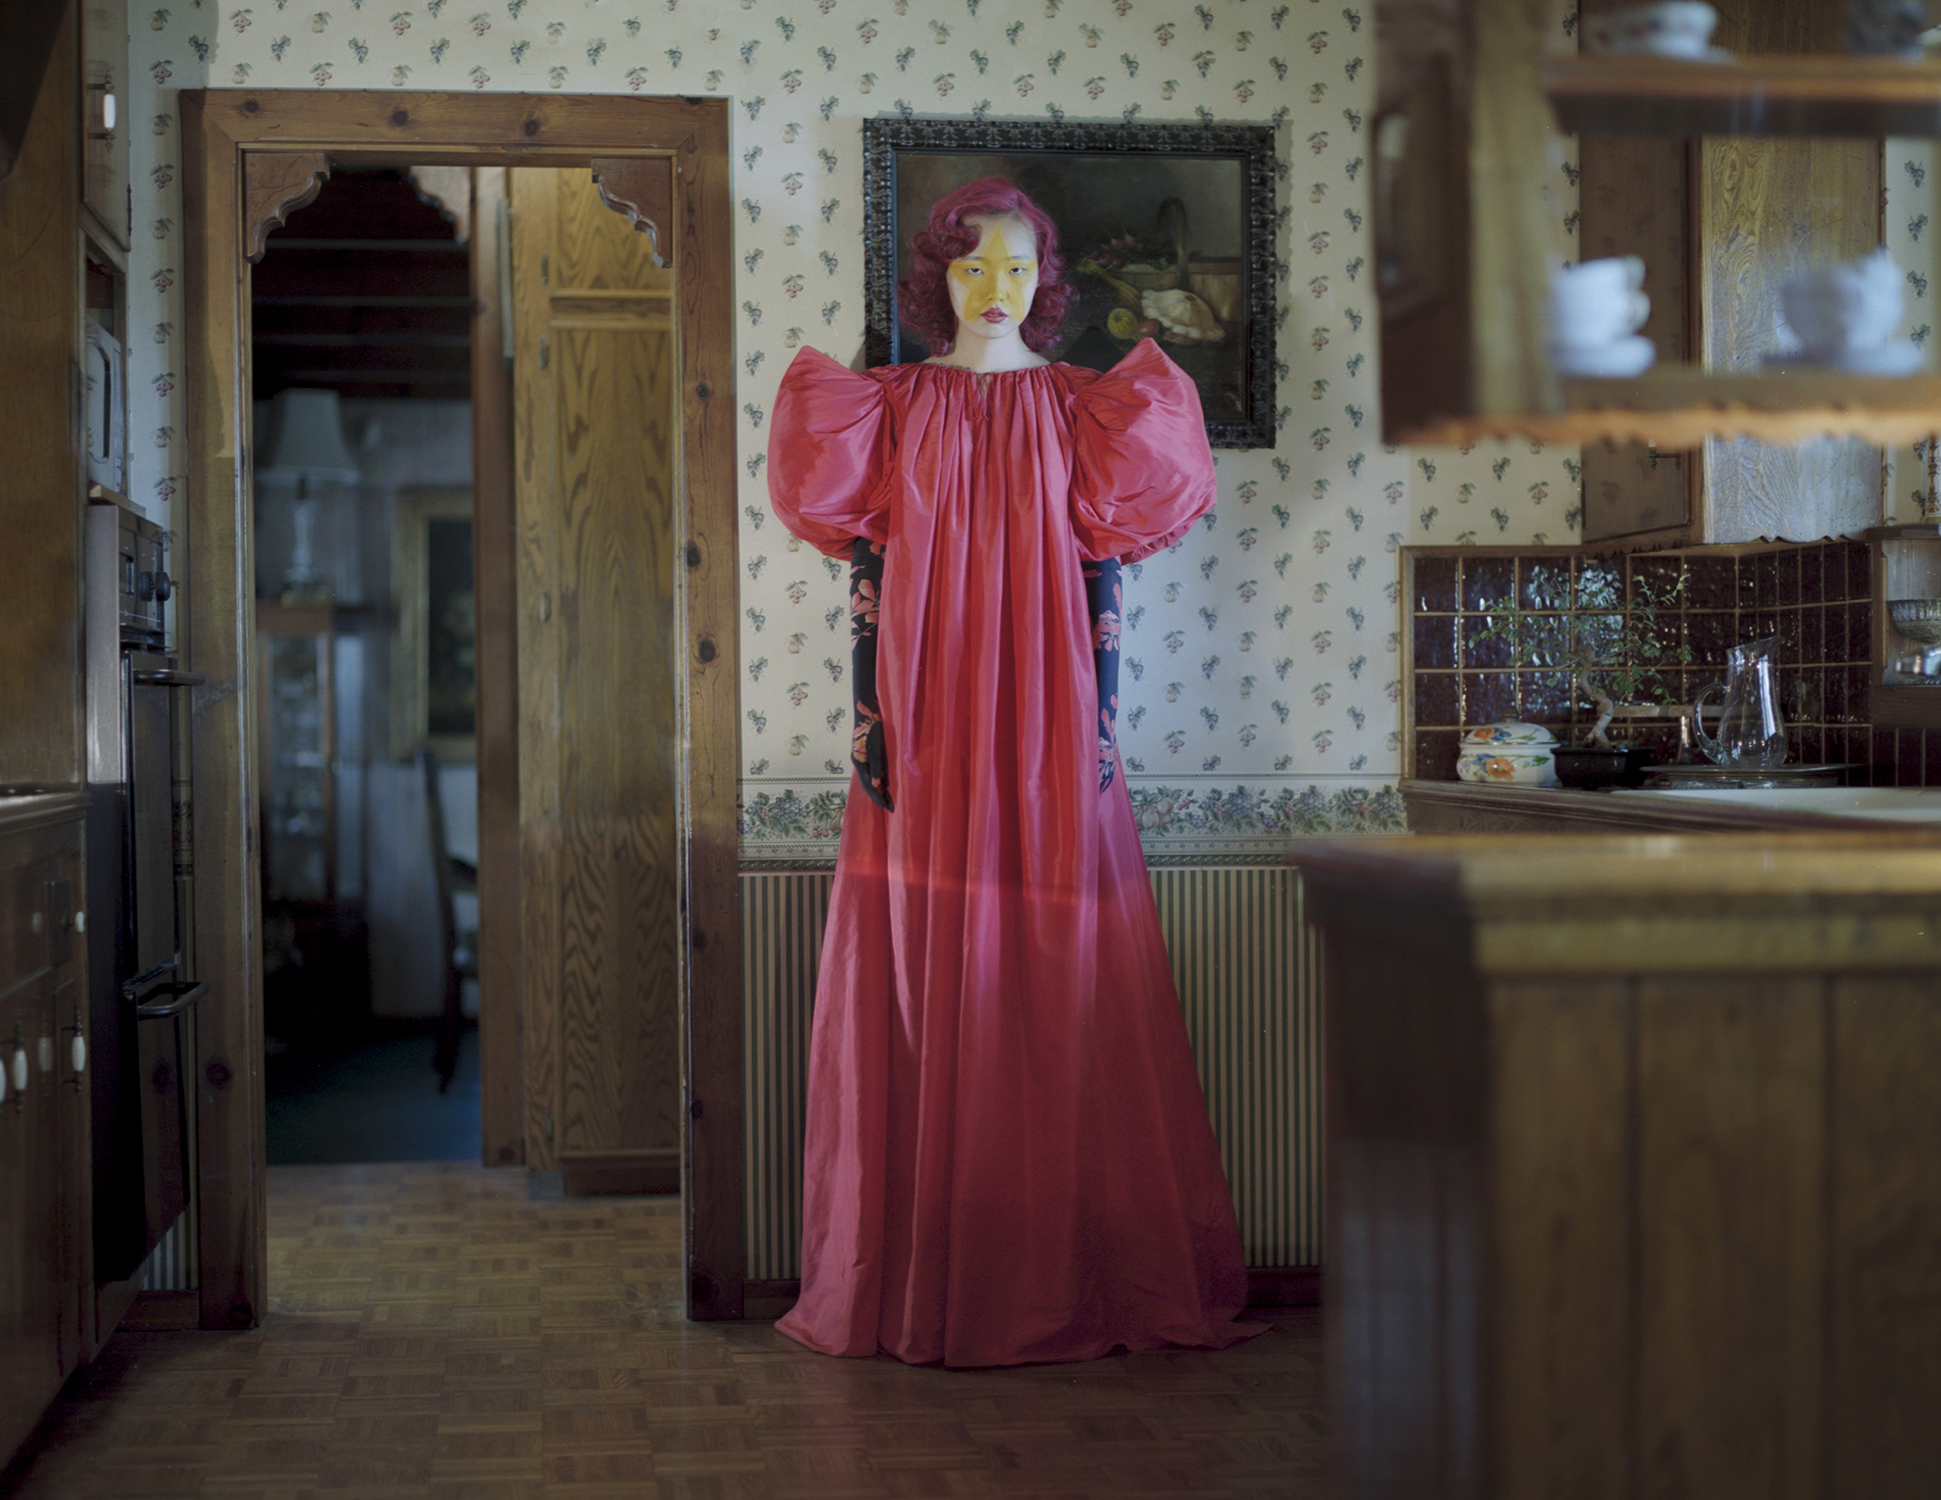 A model with yellow star makeup in a dramatic red cloak standing in a kitchen